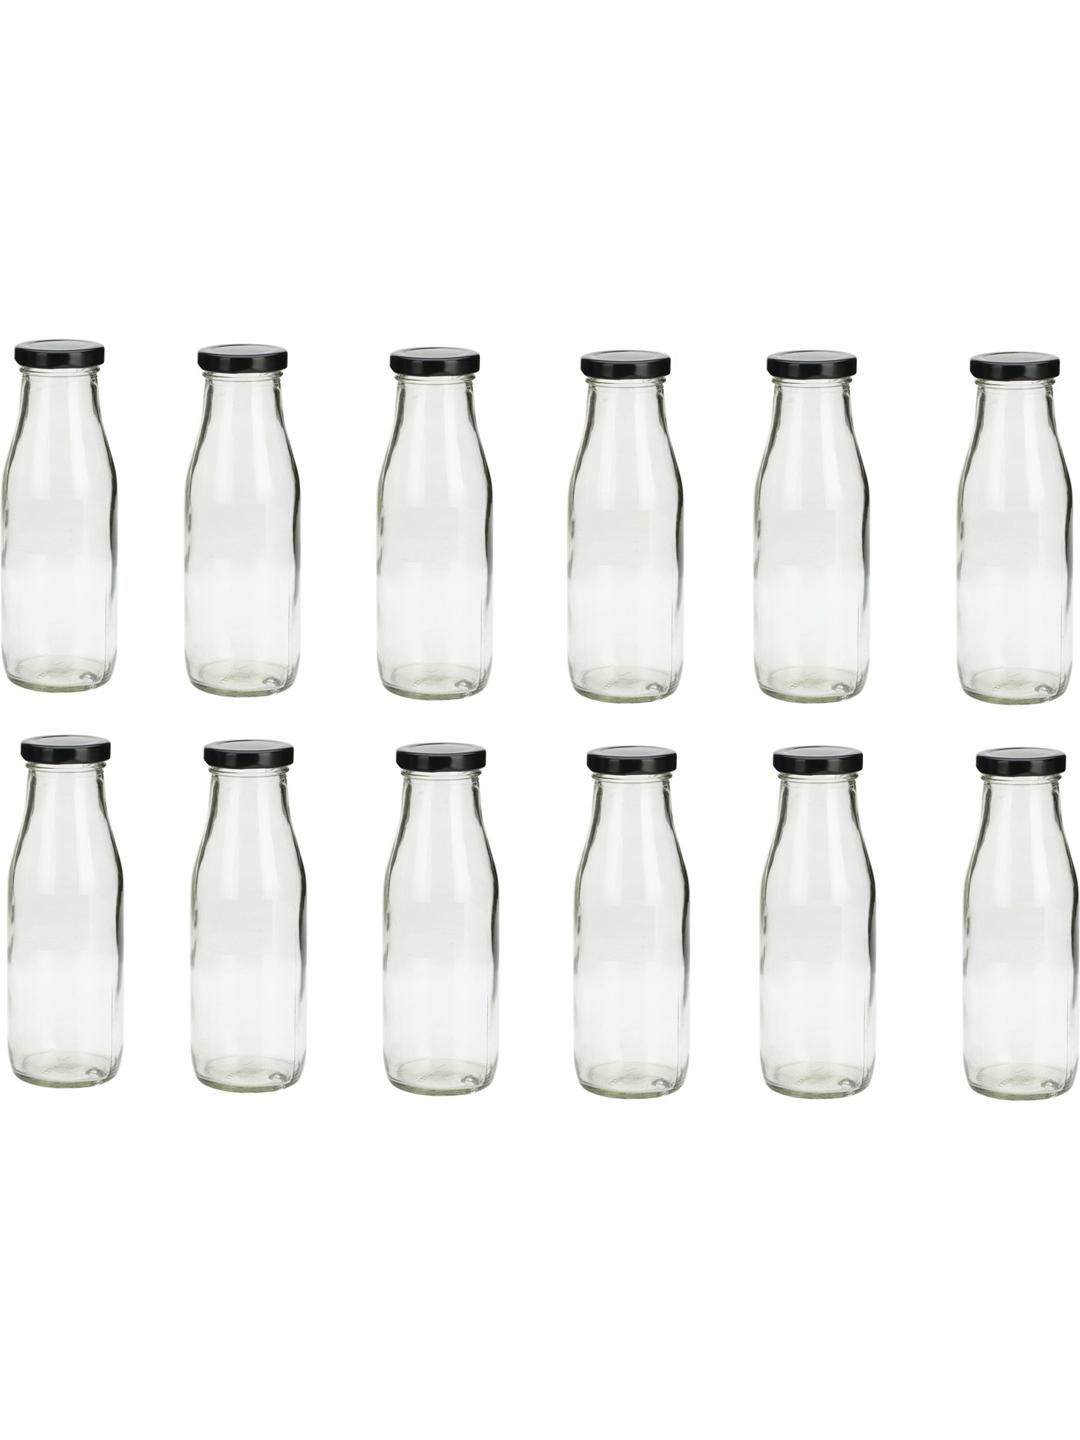     			AFAST Multipurpose Bottle Glass Transparent Utility Container ( Set of 12 )